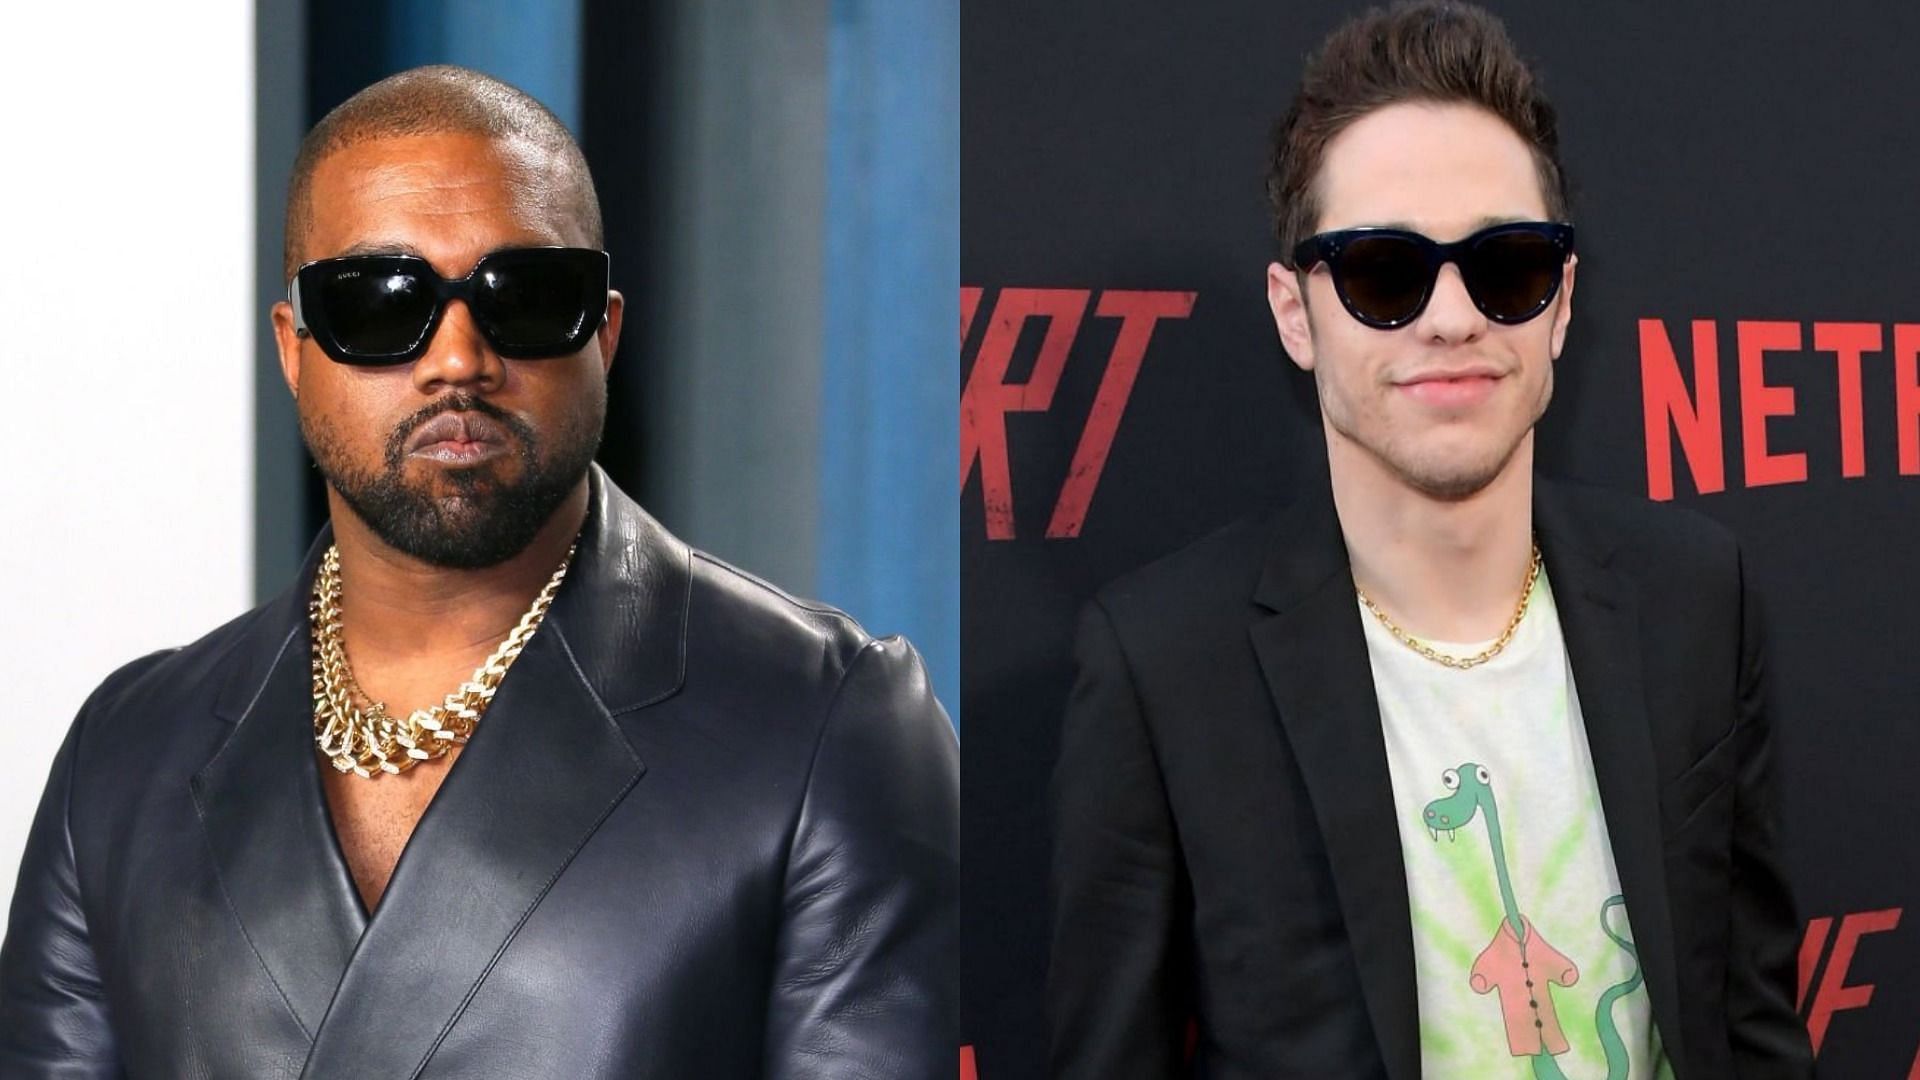 Kanye West takes another dig at Pete Davidson in new &#039;Eazy&#039; music video (Image via Jean-Baptiste Lacroix/Getty Images and Charley Gallay/Getty Images